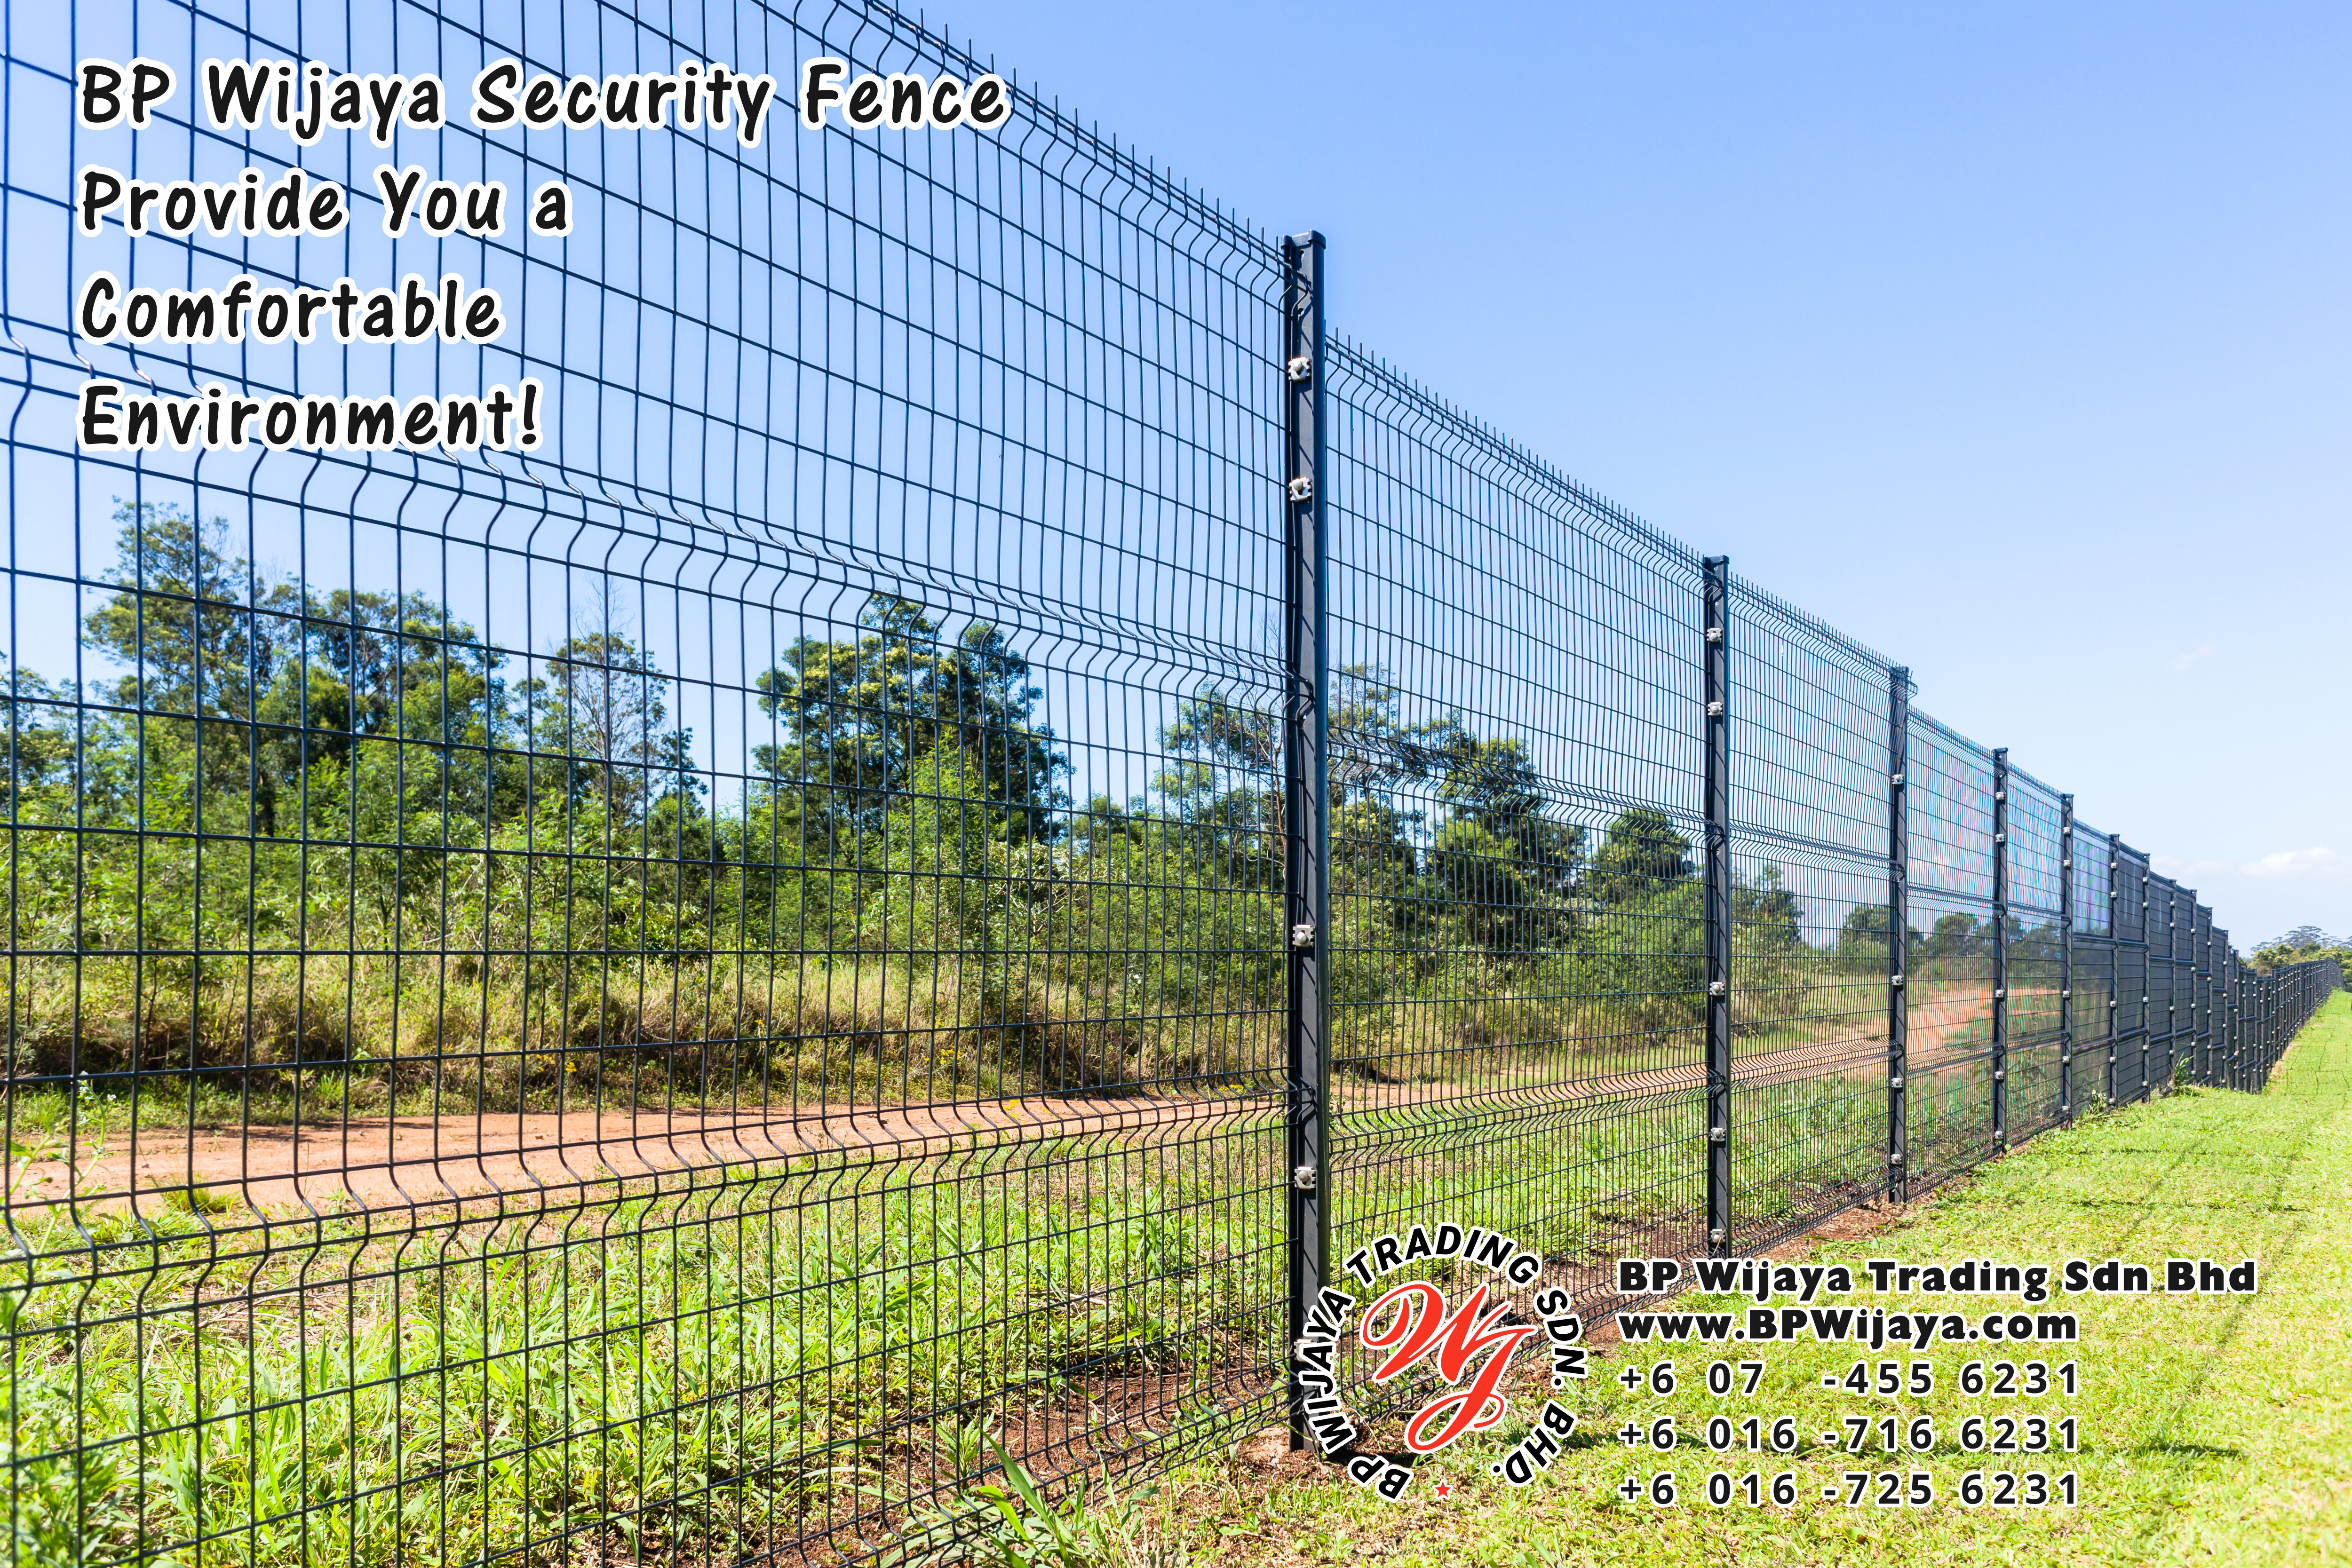 BP Wijaya Trading Sdn Bhd Malaysia Selangor Kuala Lumpur Manufacturer of Safety Fences Building Materials for Housing Construction Site Security Fencing Factory Security Home Security C01-64